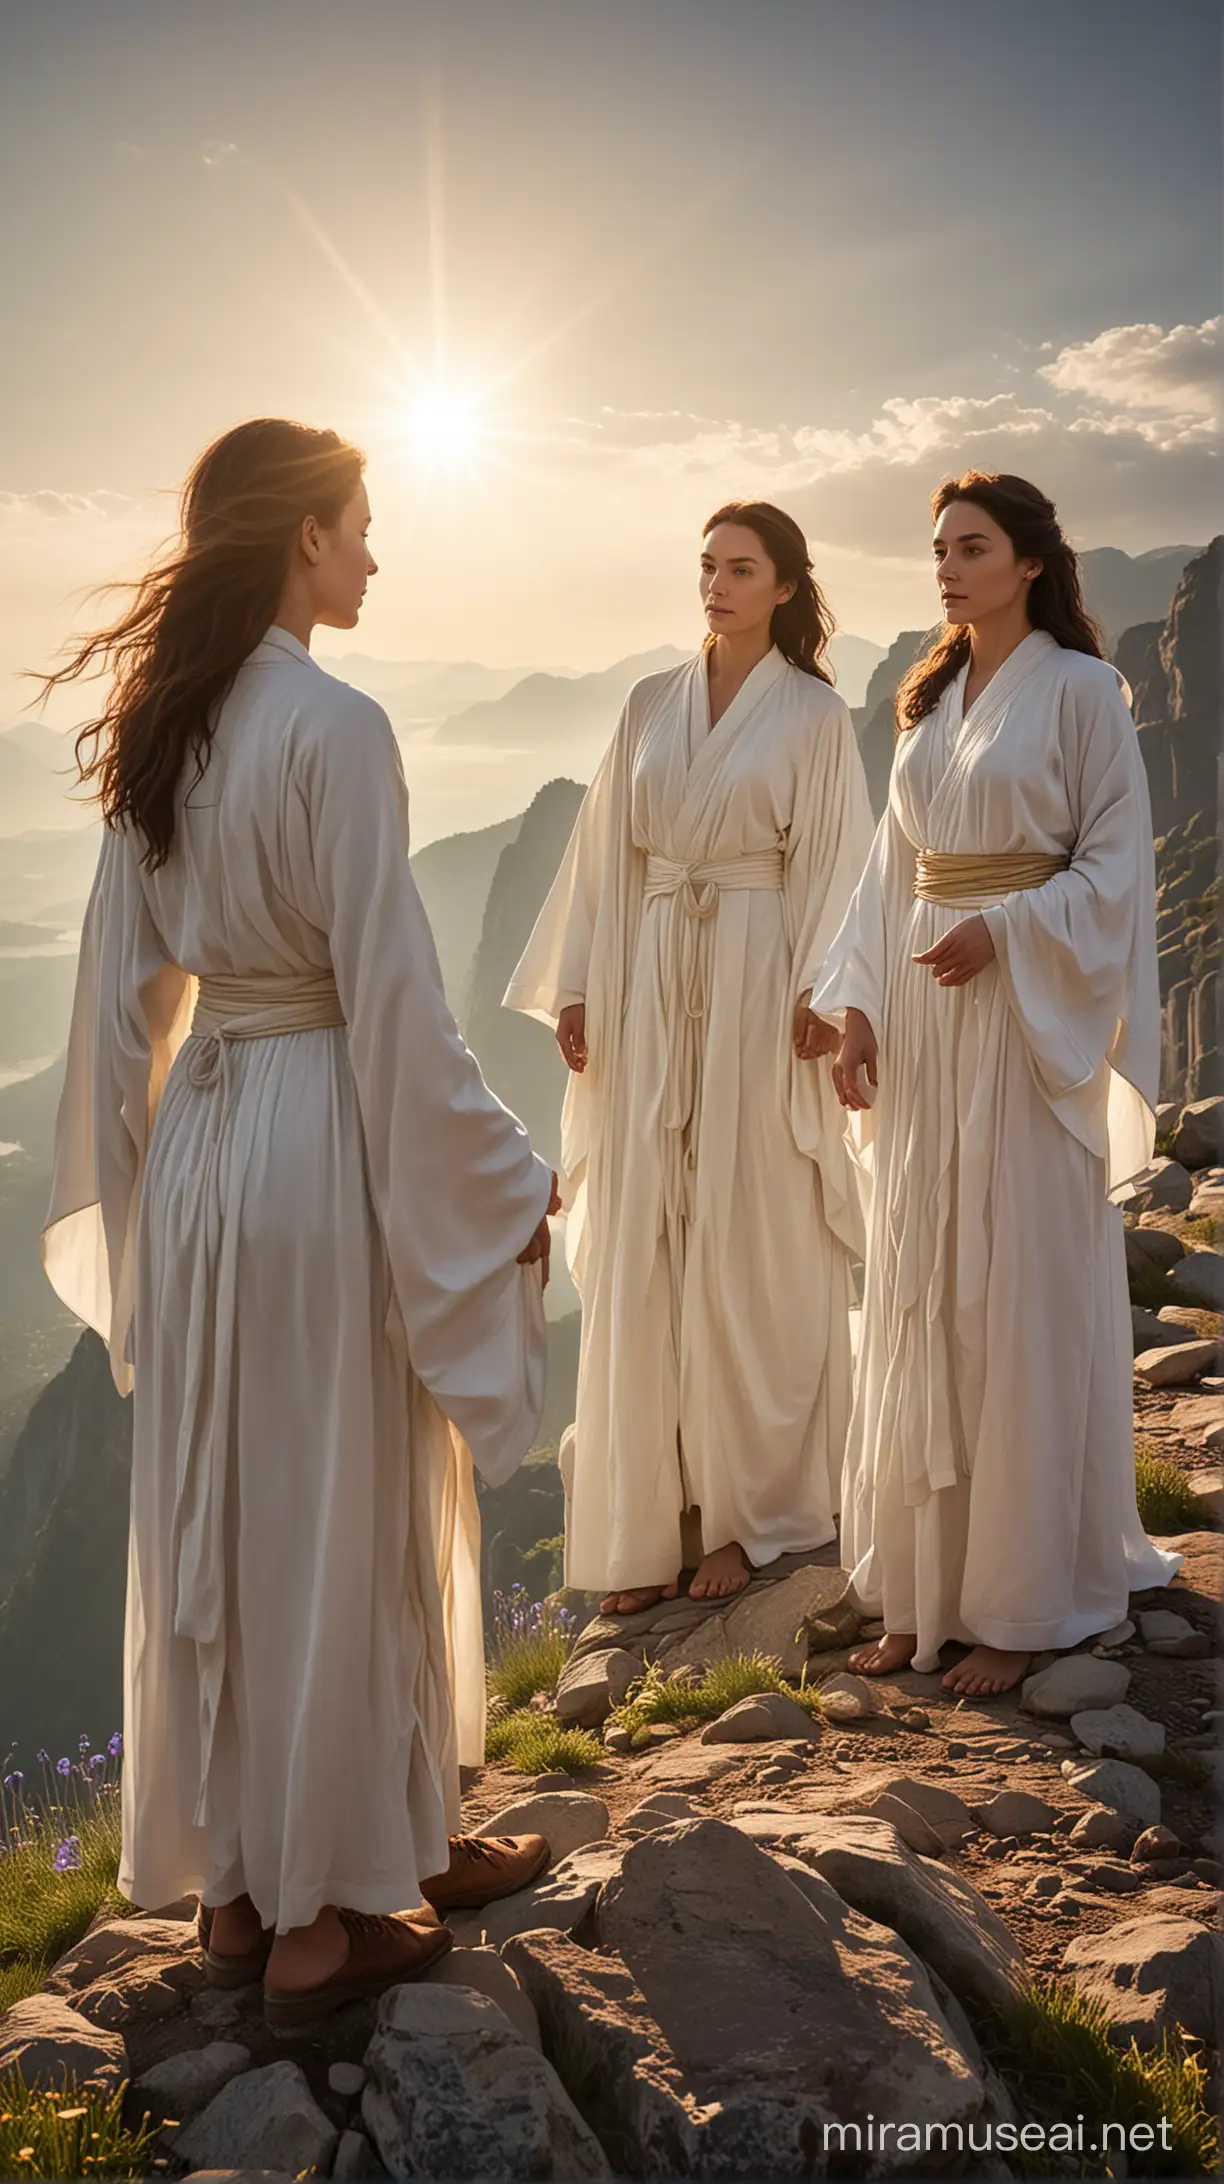 Divine Serenity Three Figures in Glowing White Robes Atop Sunlit Mountain